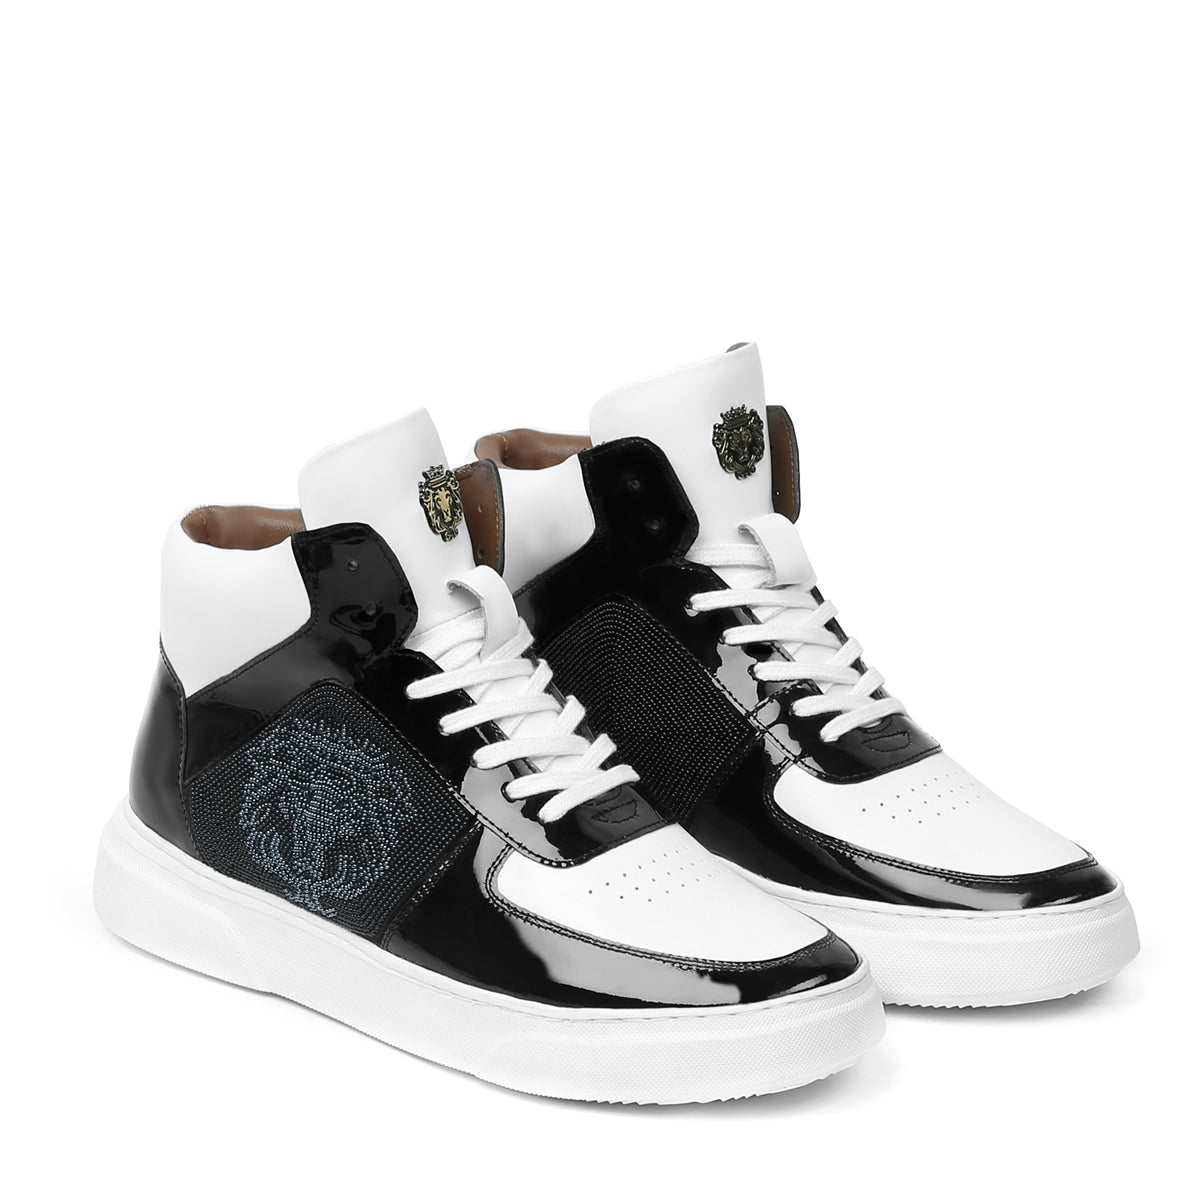 Men's Black White Patent Leather detailing Mid Top Sneakers By Brune & Bareskin